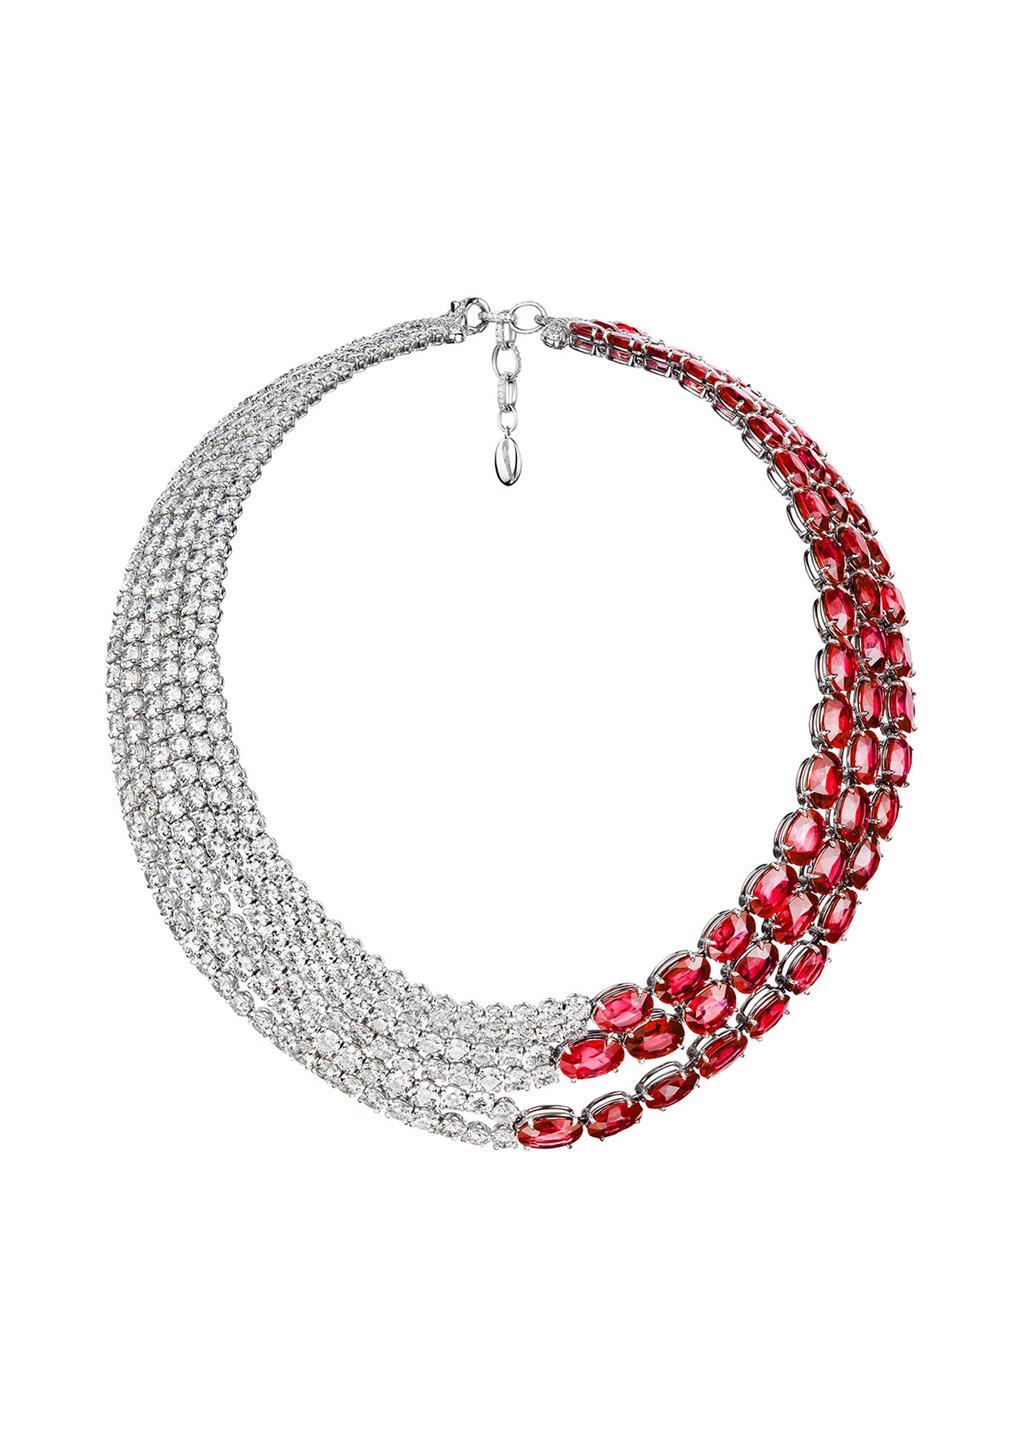 Necklace "L'Automne" - White gold set with 60 oval cut rubies and 280 diamonds